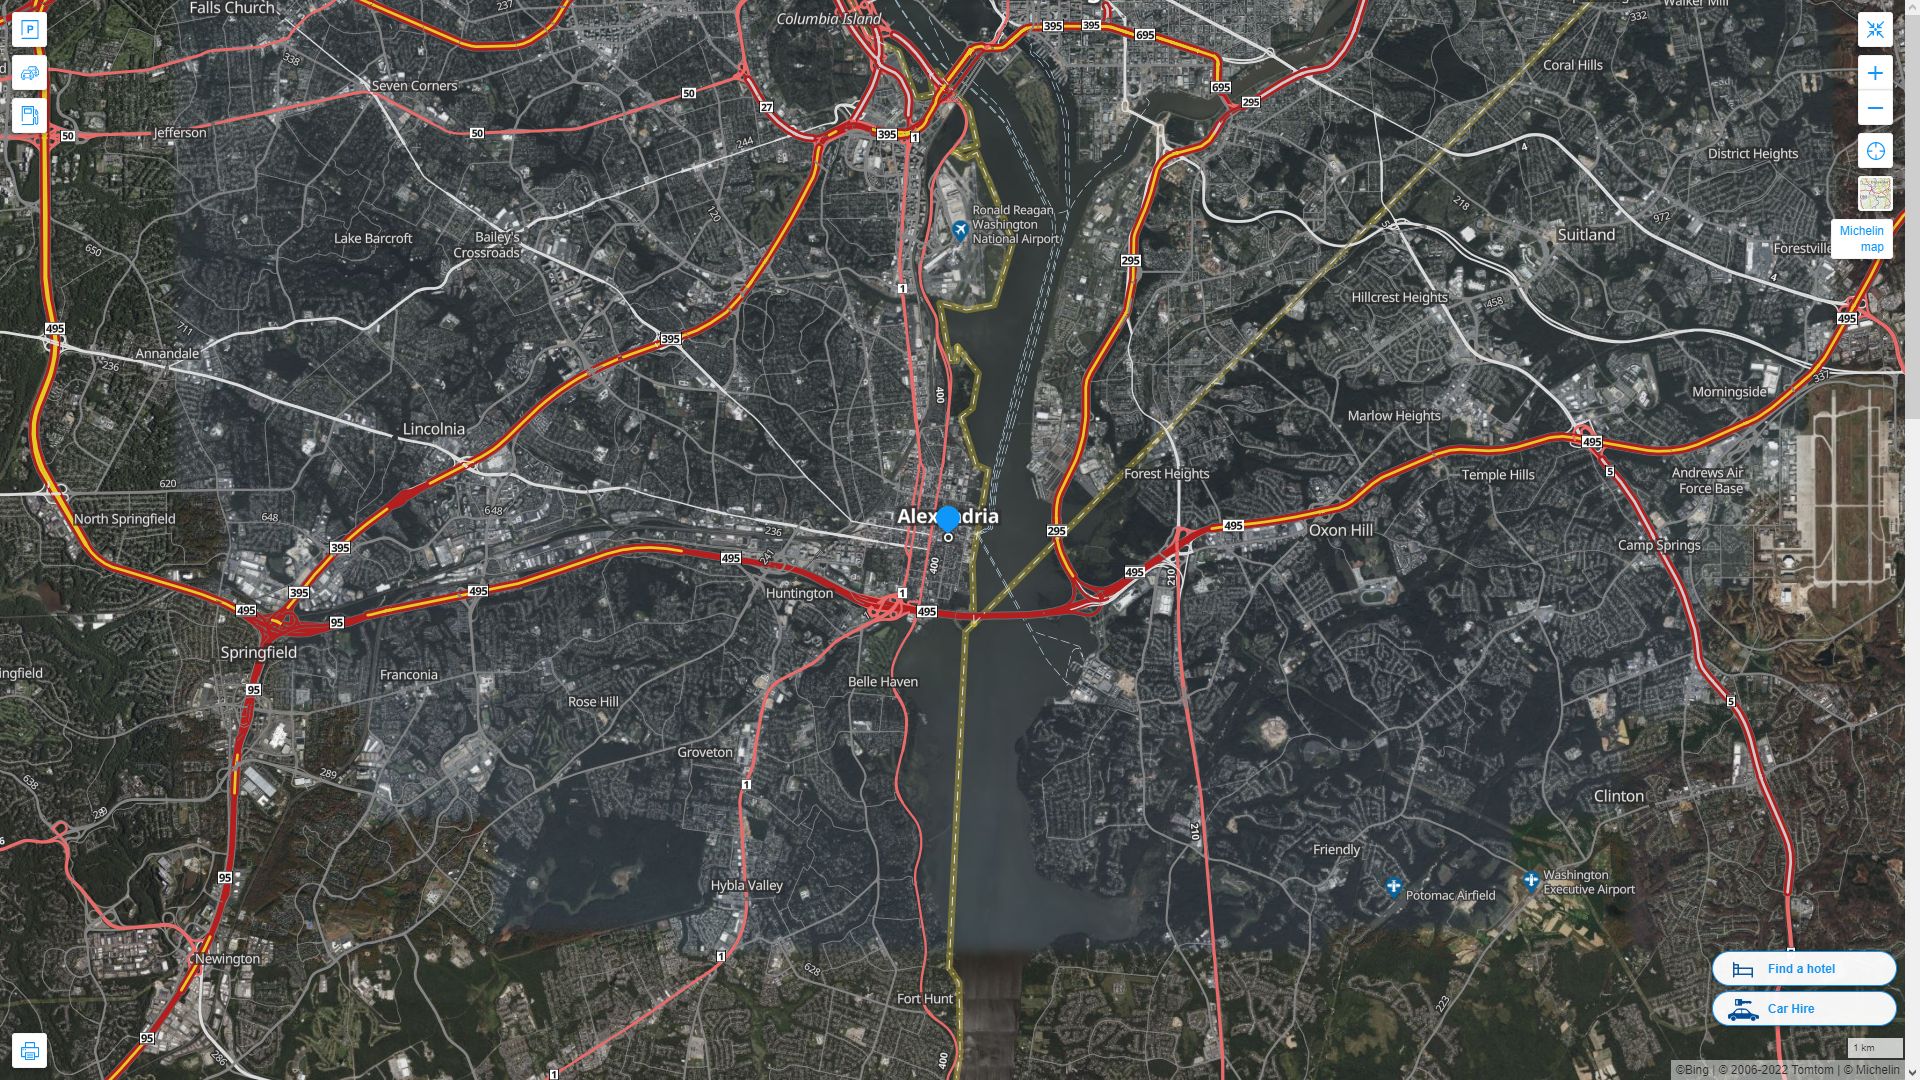 Alexandria Virginia Highway and Road Map with Satellite View